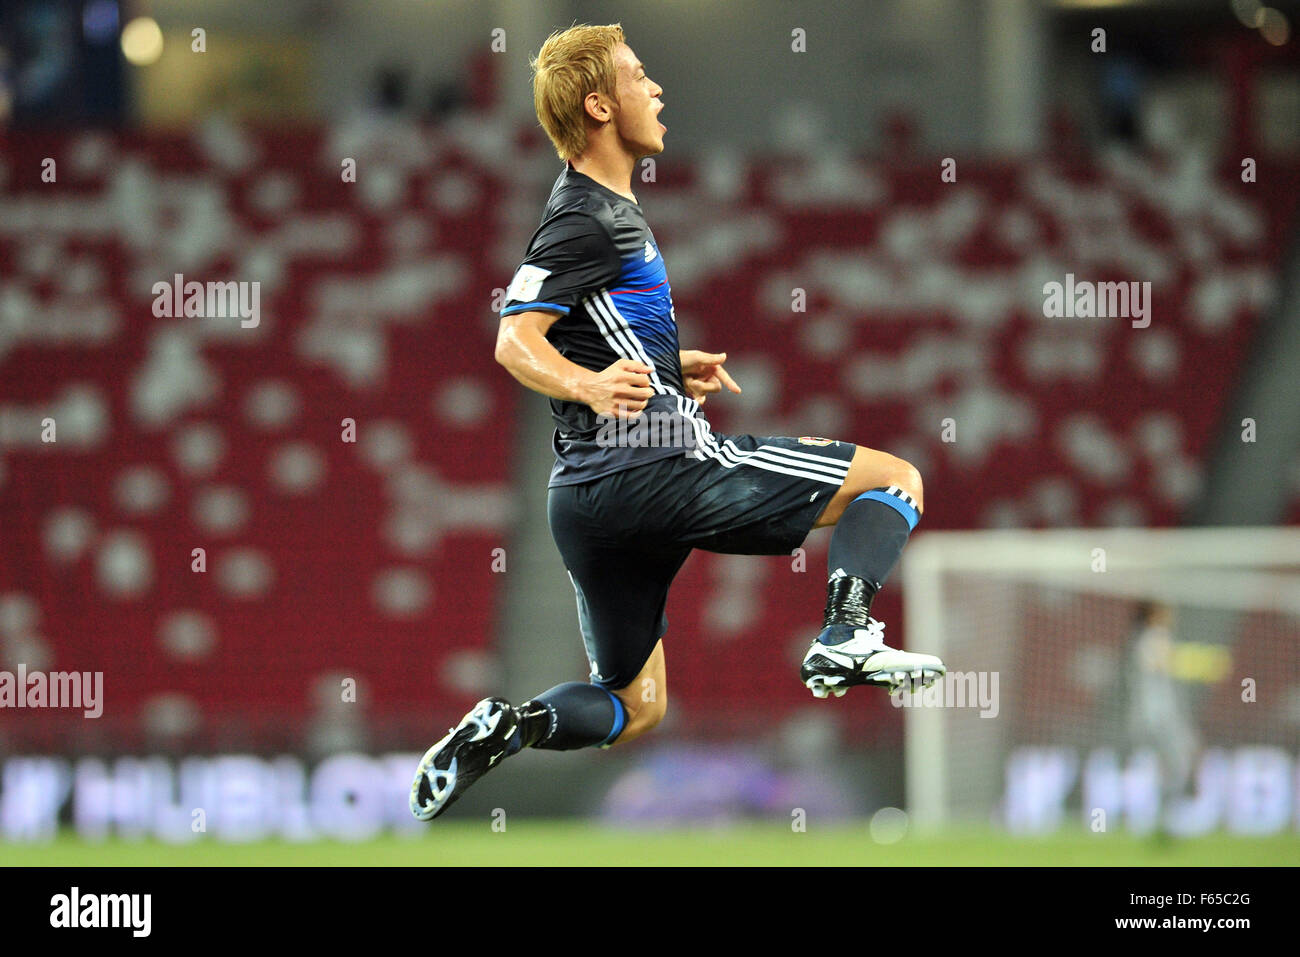 Singapore. 12th Nov, 2015. Japan's Keisuke Honda celebrates after scoring during the 2018 FIFA World Cup Group E Asia qualifier match between Singapore and Japan in Singapore's National Stadium, Nov. 12, 2015. Credit:  Then Chih Wey/Xinhua/Alamy Live News Stock Photo